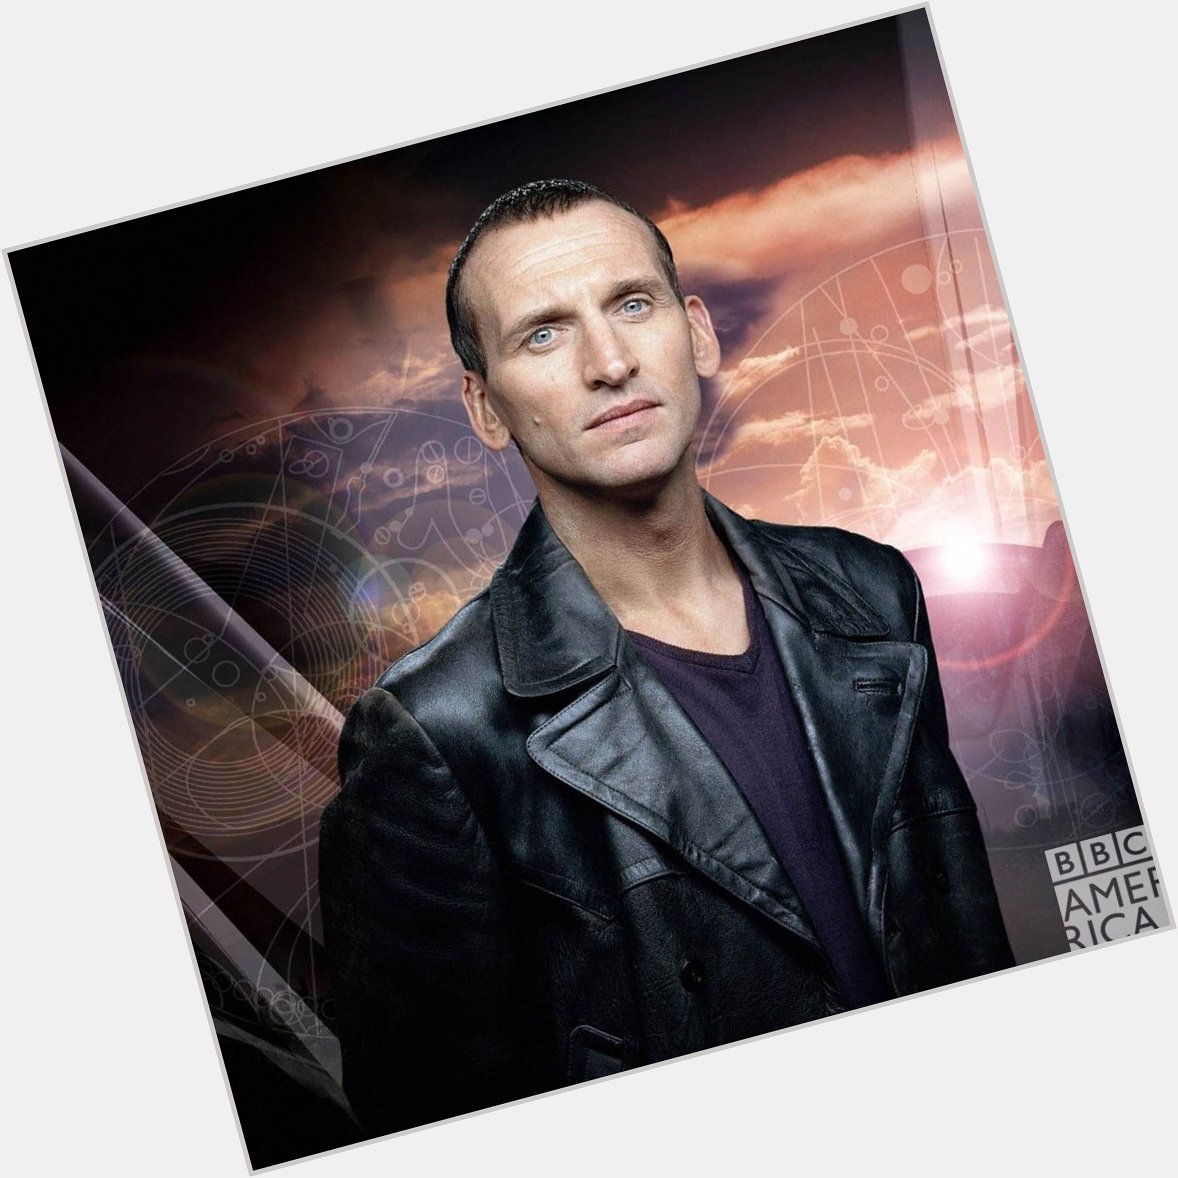 A very happy birthday to the fantastic Christopher Eccleston, who played the Ninth Doctor! 